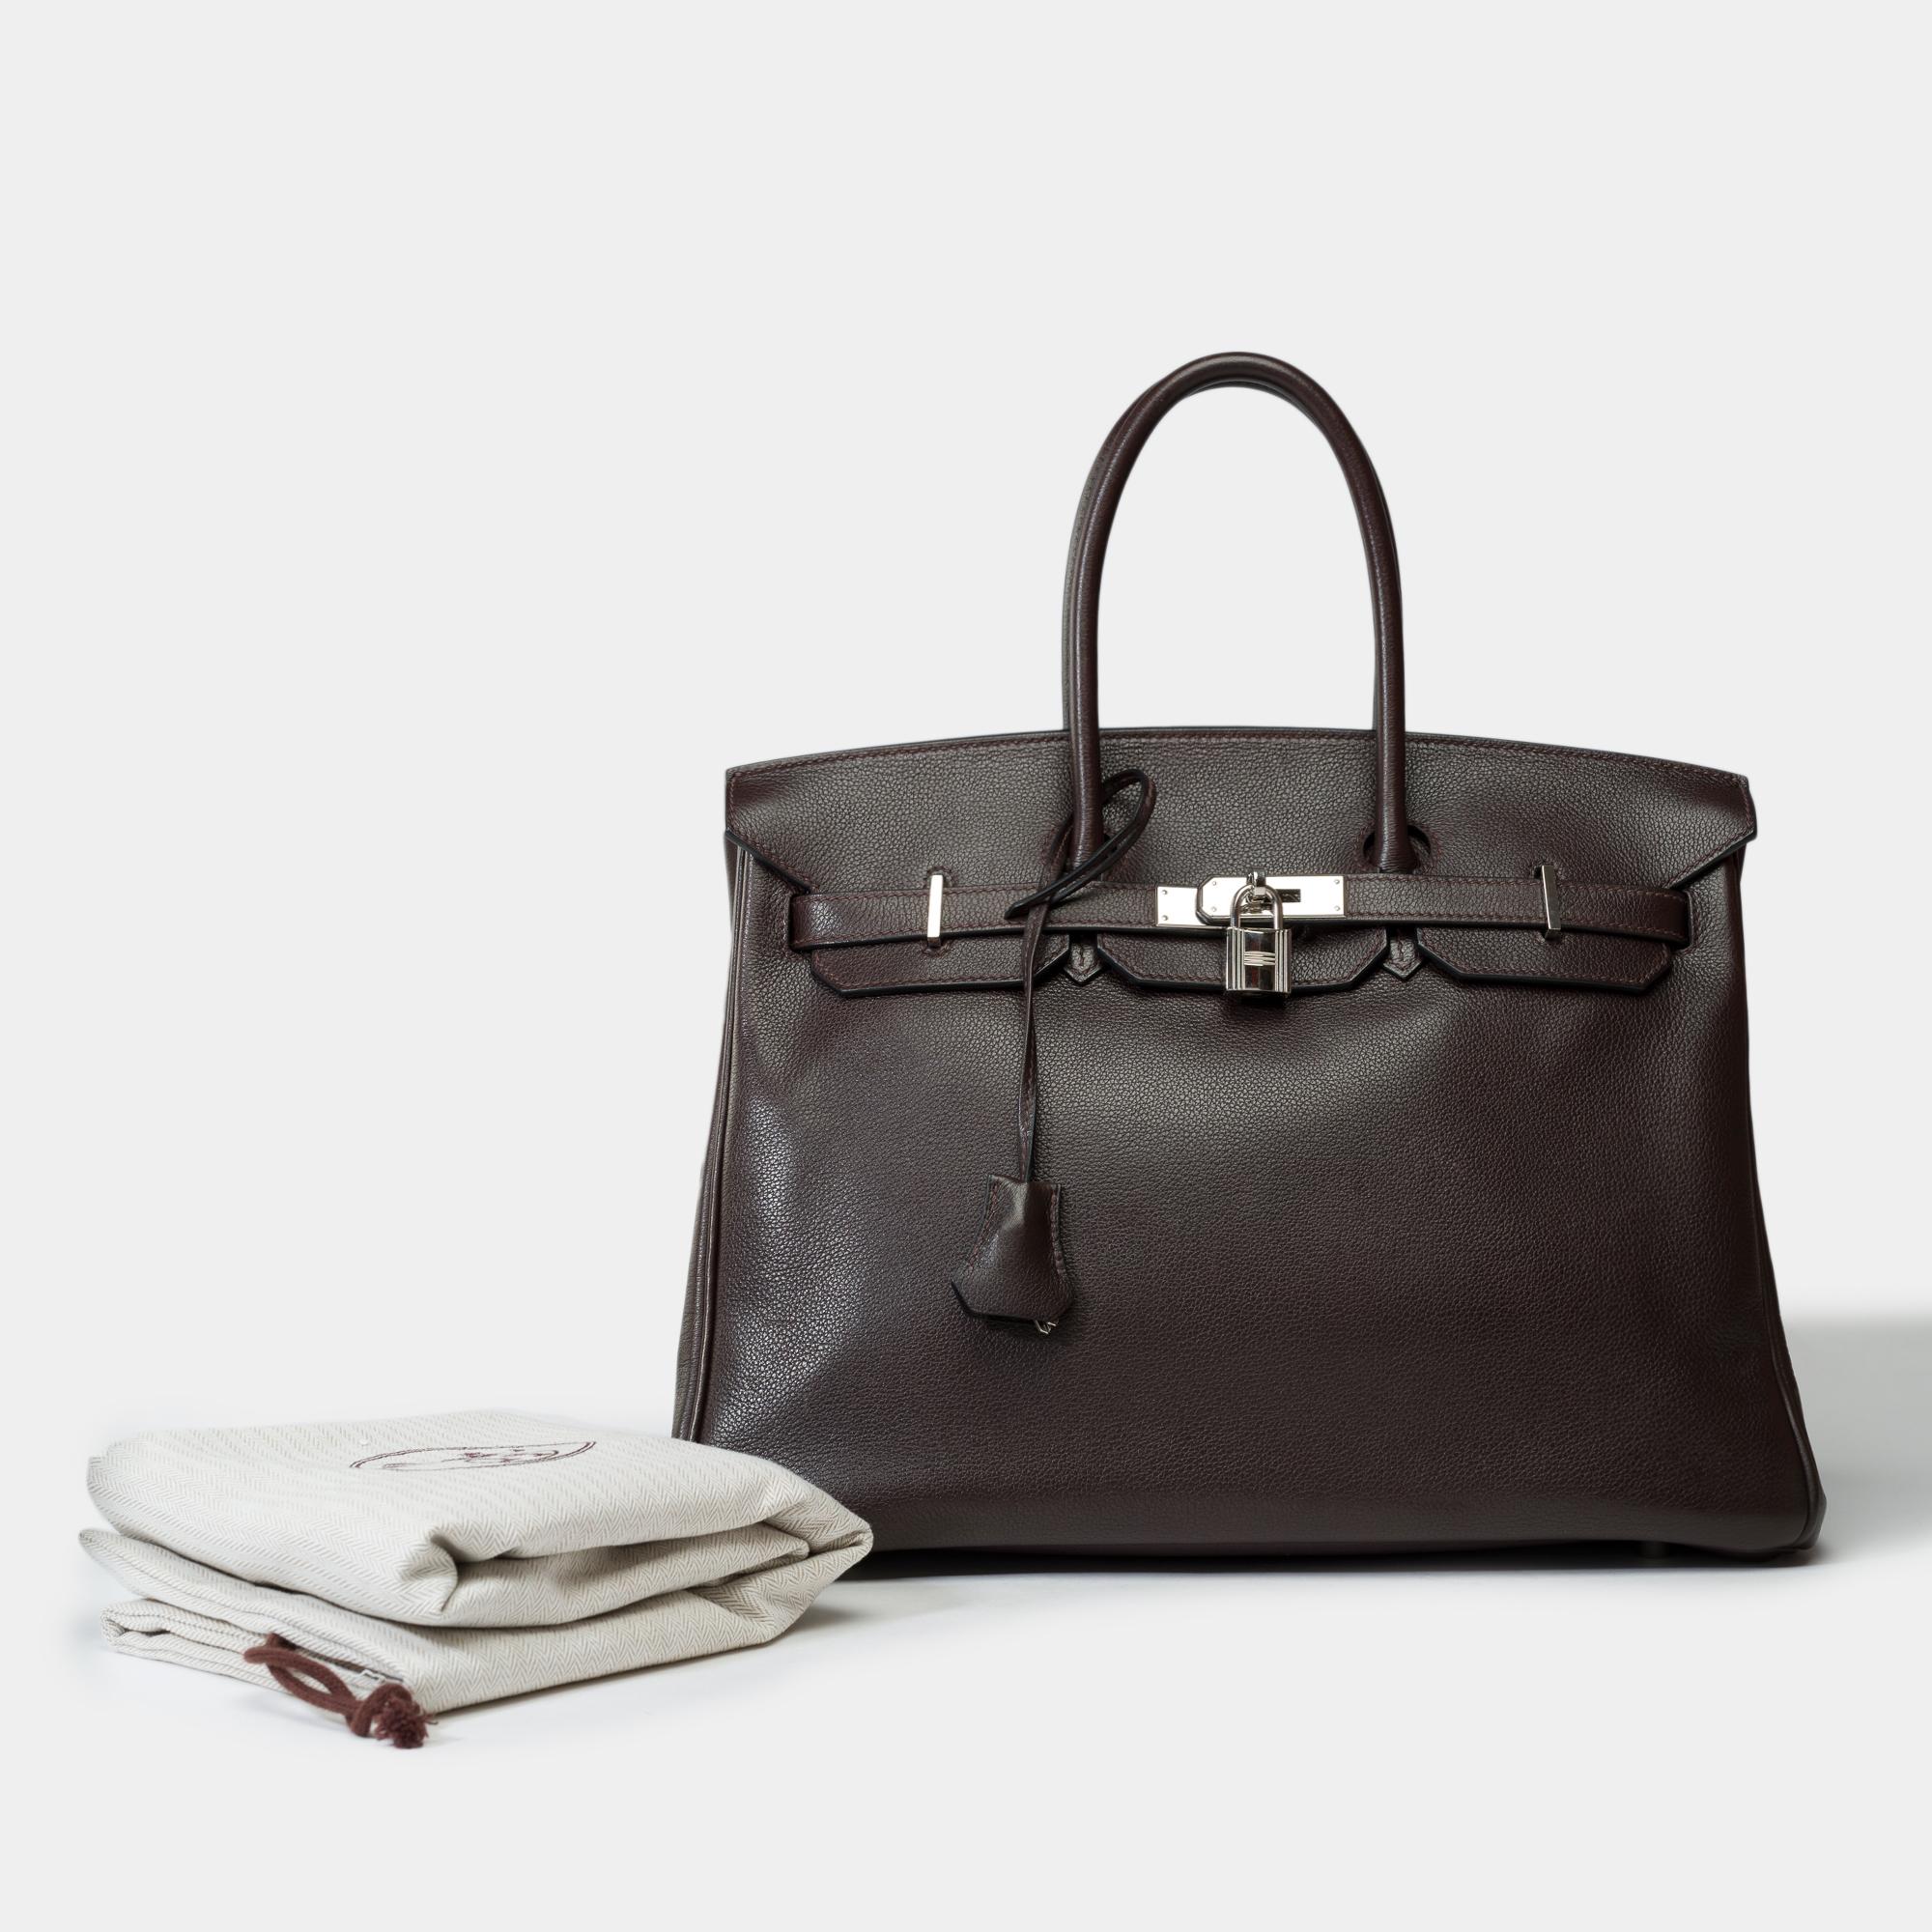 Hermes Birkin 35 handbag in grained calf leather Evergrain brown , palladium silver metal trim, double handle in brown leather allowing a hand carry

Flap closure
Brown leather inner lining, a zippered pocket, a patch pocket
Signature: 